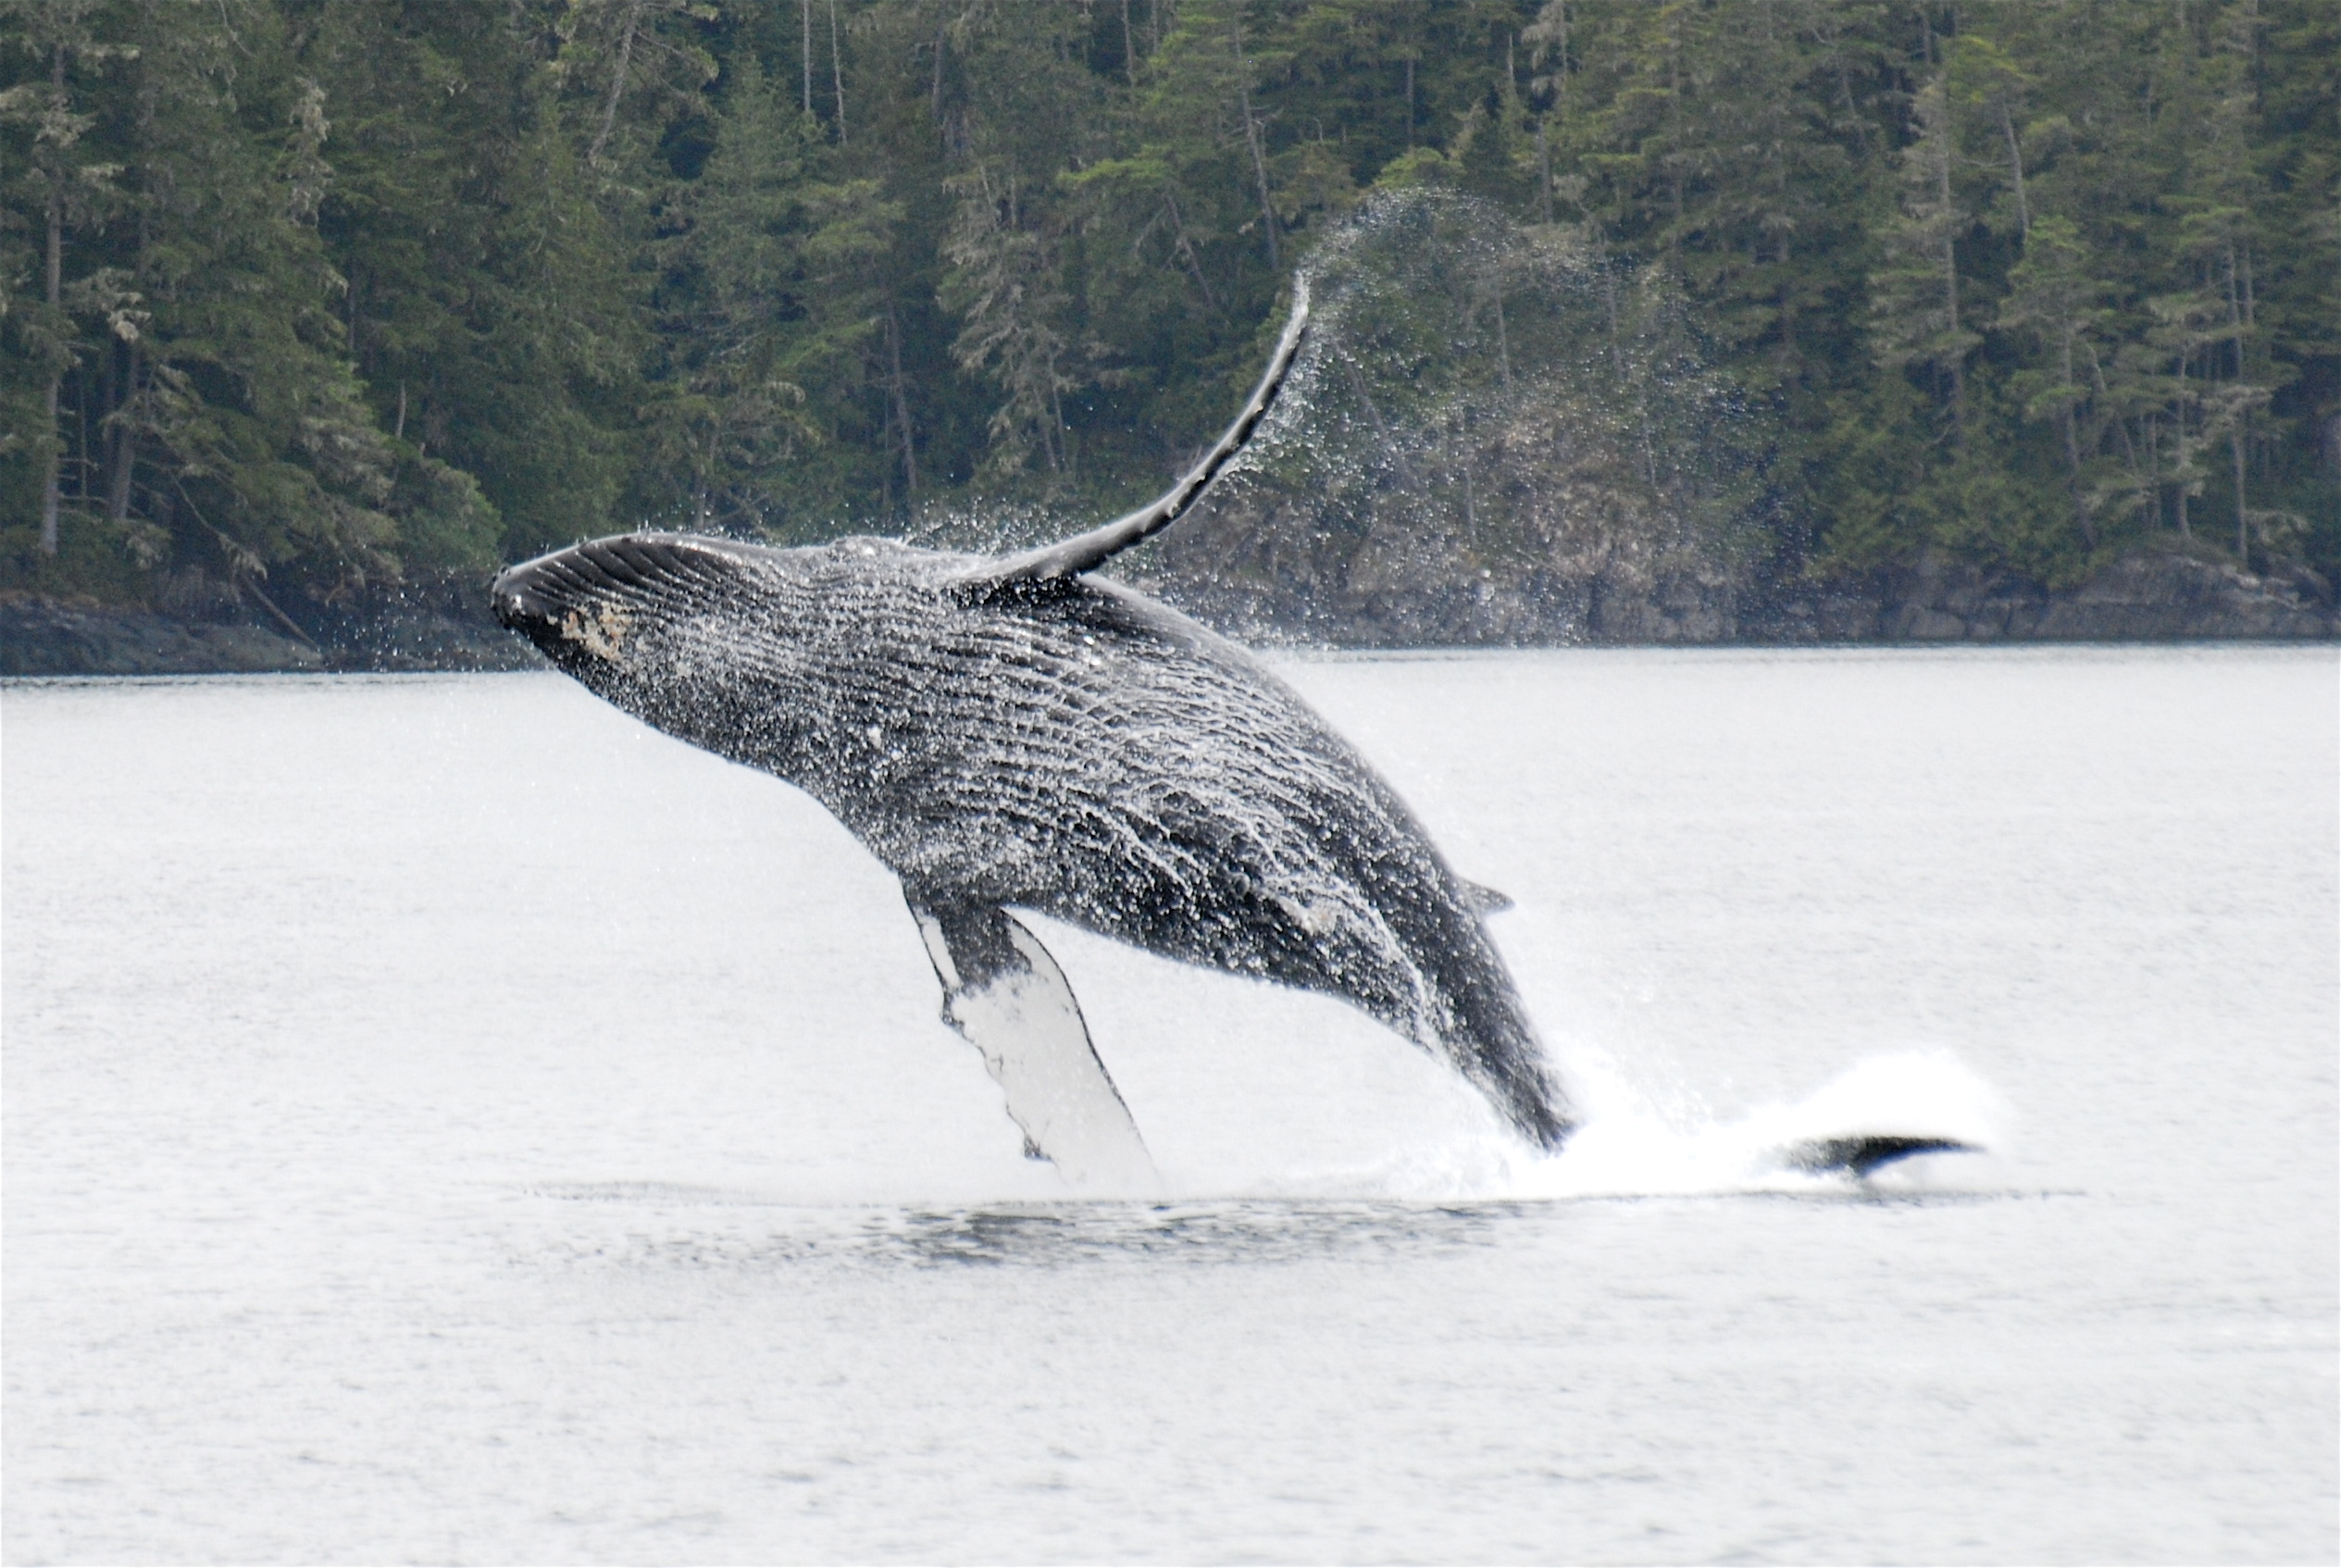 12-year-old humpback whale "KC" (BCY0291), breaching.  KC was first documented by MERS research off northern Vancouver Island when he was a calf in 2002, and has returned every year since then. (Photo by Christie McMillan, MERS)